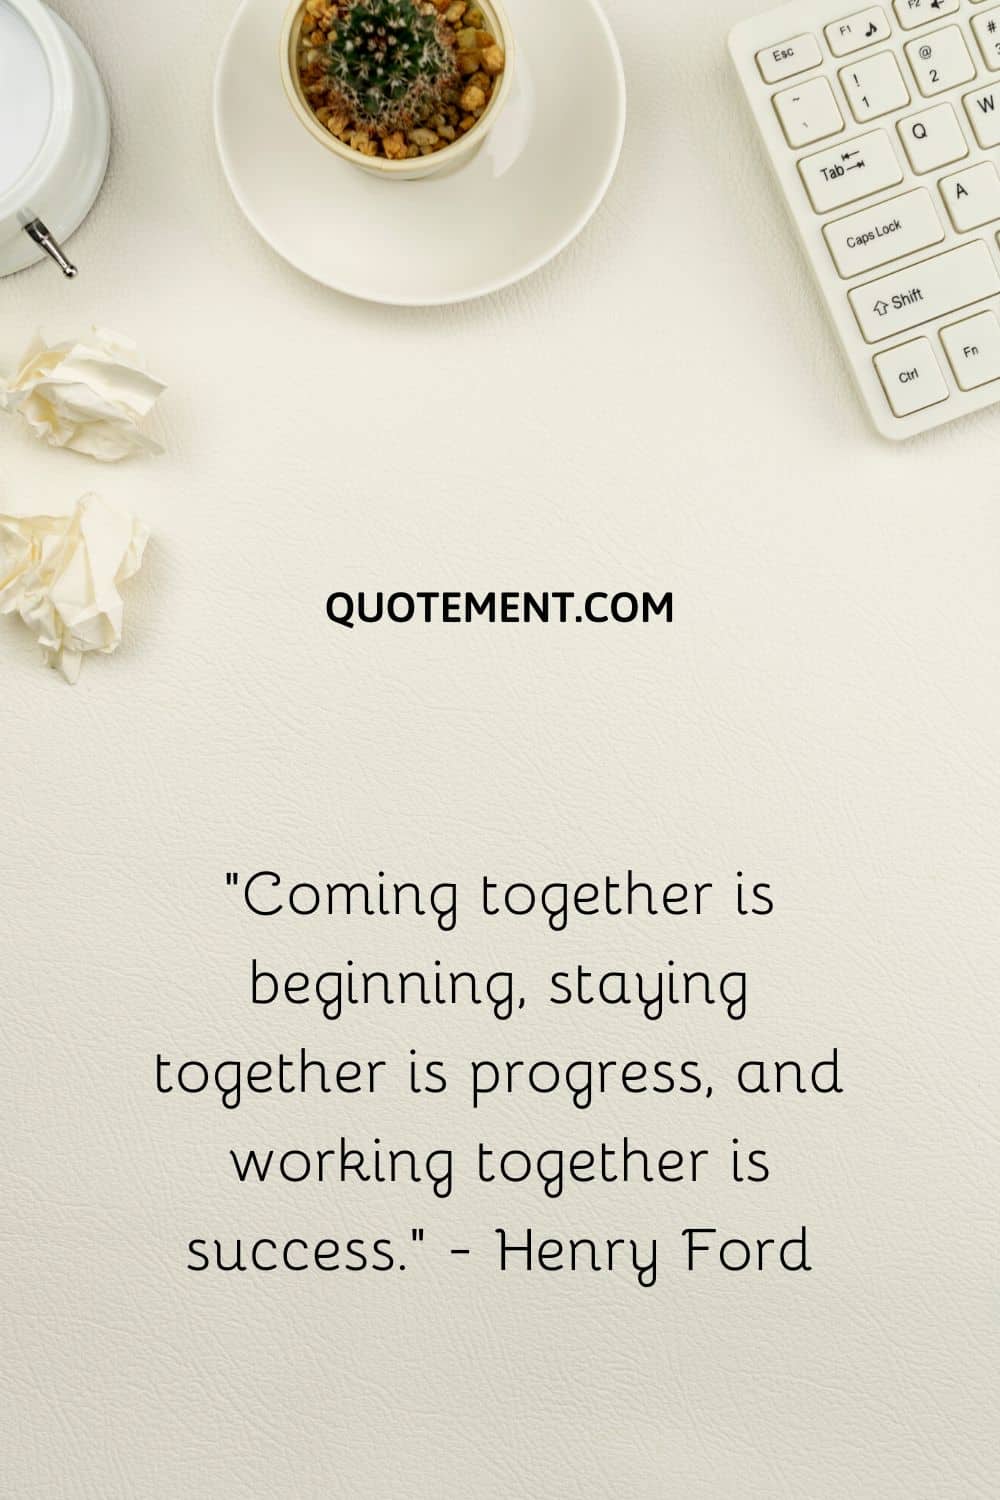 “Coming together is beginning, staying together is progress, and working together is success.” - Henry Ford